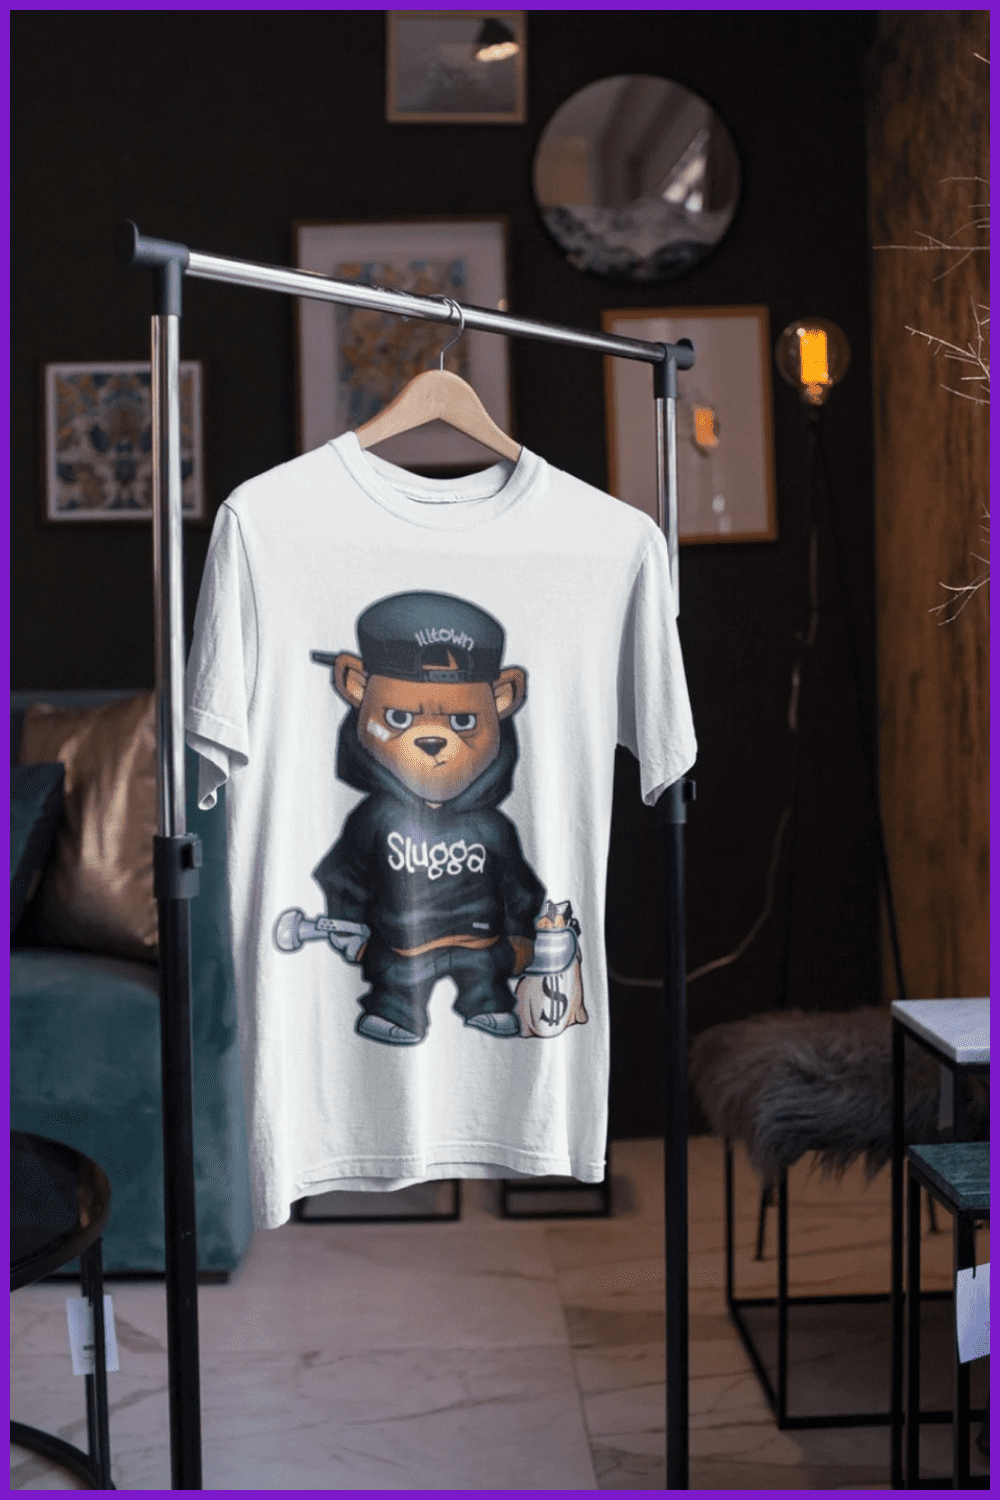 A white t-shirt with a ganster bear on it hangs on a hanger.